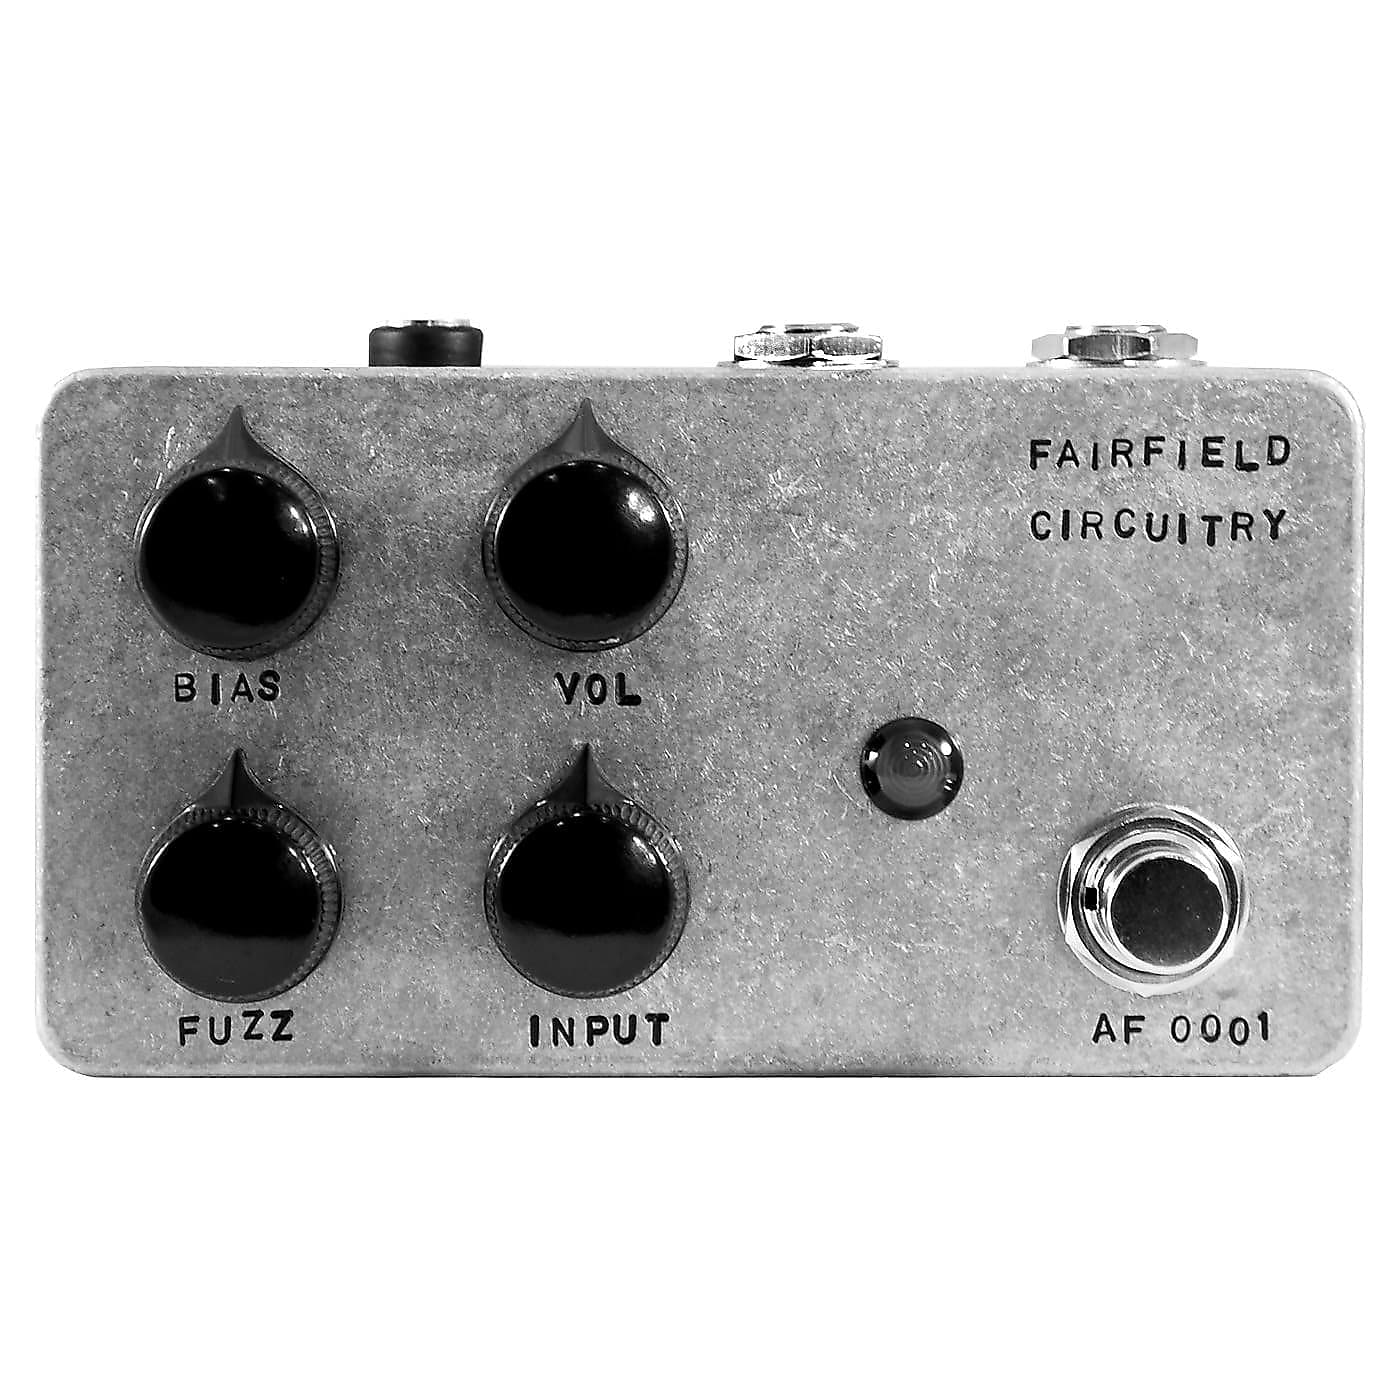 Fairfield Circuitry ~900 About Nine Hundred Fuzz | Reverb